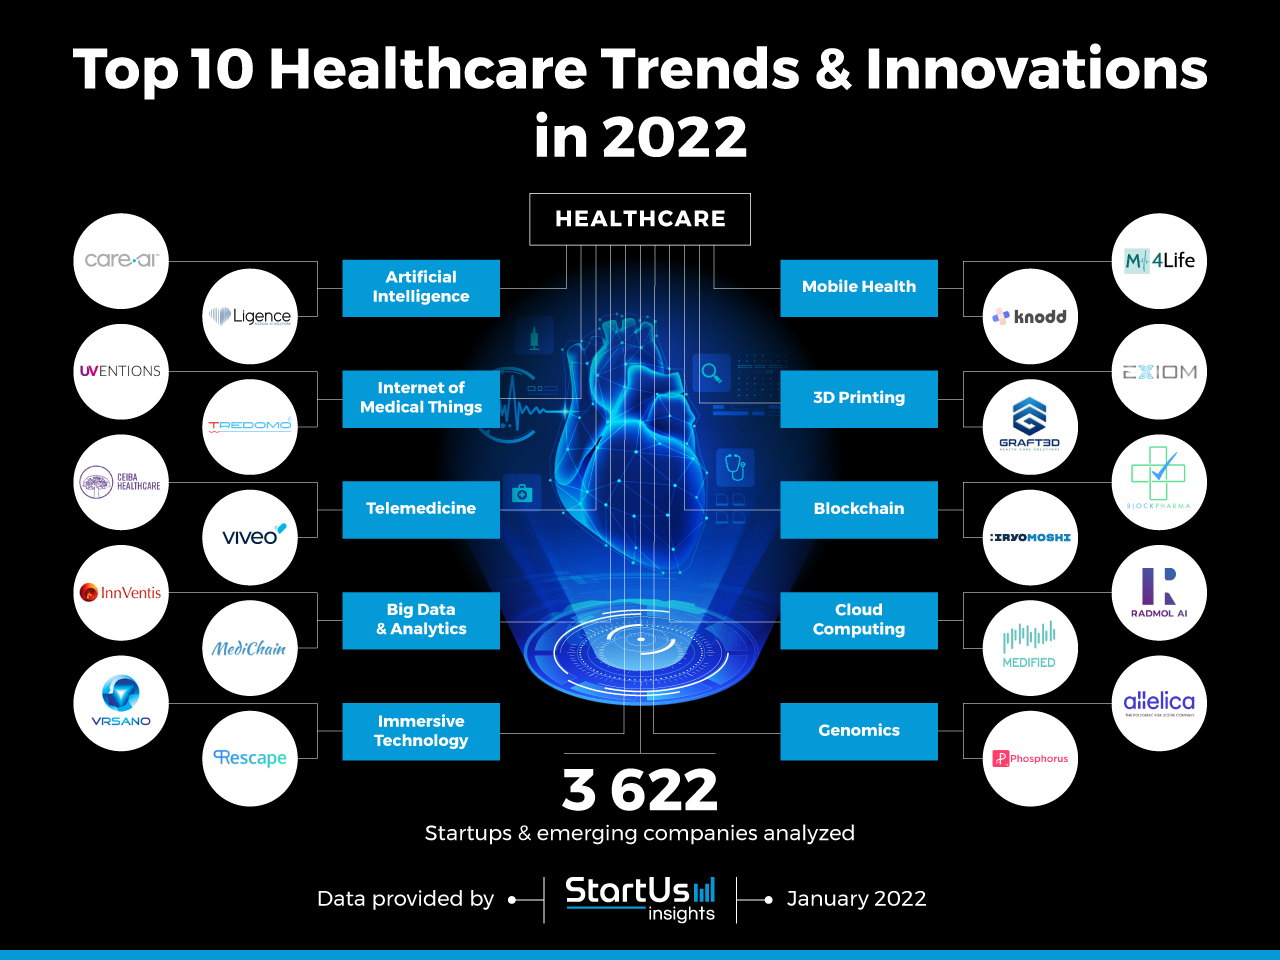 Top 10 Healthcare Industry Trends & Innovations in 2022 | StartUs Insights